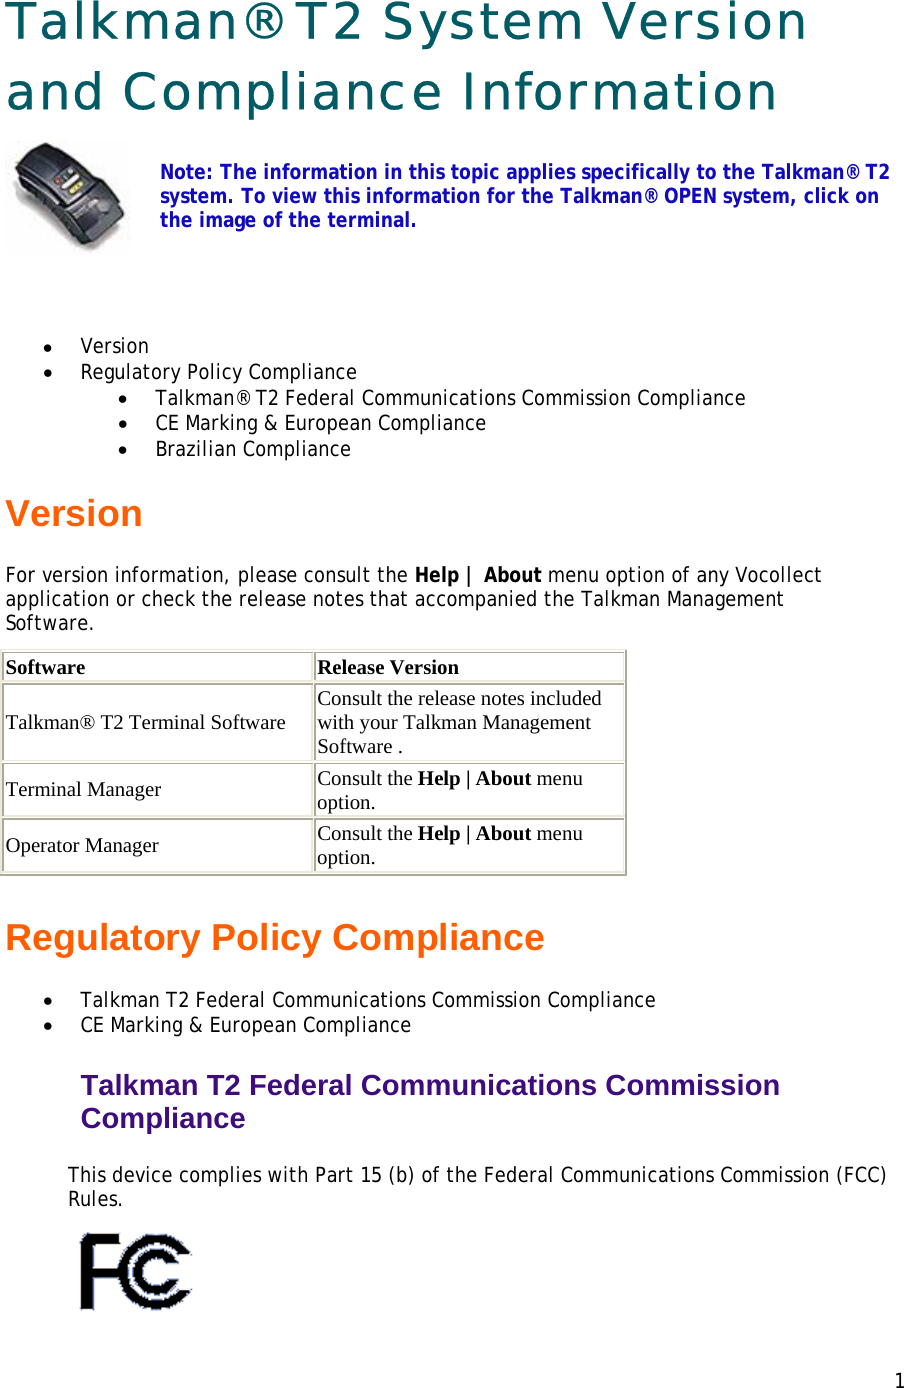 Talkman® T2 System Version and Compliance Information  Note: The information in this topic applies specifically to the Talkman® T2 system. To view this information for the Talkman® OPEN system, click on the image of the terminal.  • Version • Regulatory Policy Compliance  • Talkman® T2 Federal Communications Commission Compliance • CE Marking &amp; European Compliance • Brazilian Compliance Version For version information, please consult the Help | About menu option of any Vocollect application or check the release notes that accompanied the Talkman Management Software. Software Release VersionTalkman® T2 Terminal Software Consult the release notes included with your Talkman Management Software . Terminal Manager Consult the Help | About menu option. Operator Manager Consult the Help | About menu option. Regulatory Policy Compliance • Talkman T2 Federal Communications Commission Compliance • CE Marking &amp; European Compliance Talkman T2 Federal Communications Commission Compliance  This device complies with Part 15 (b) of the Federal Communications Commission (FCC) Rules.   1 